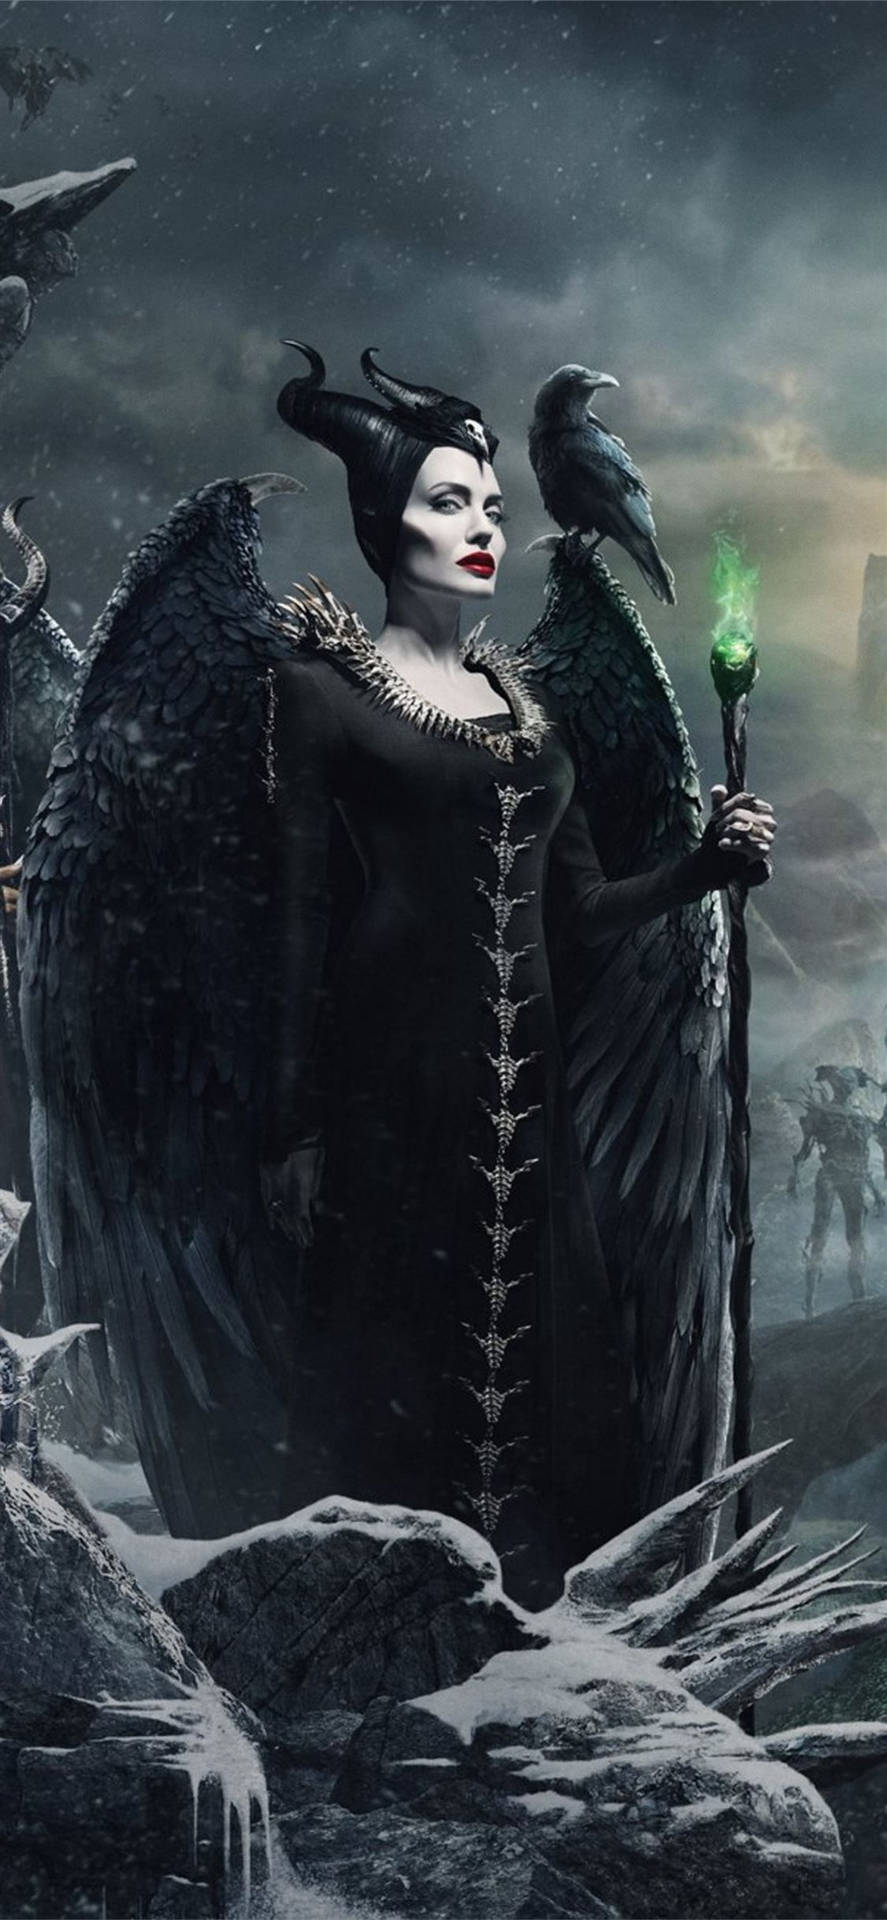 Menacing Maleficent With Crow